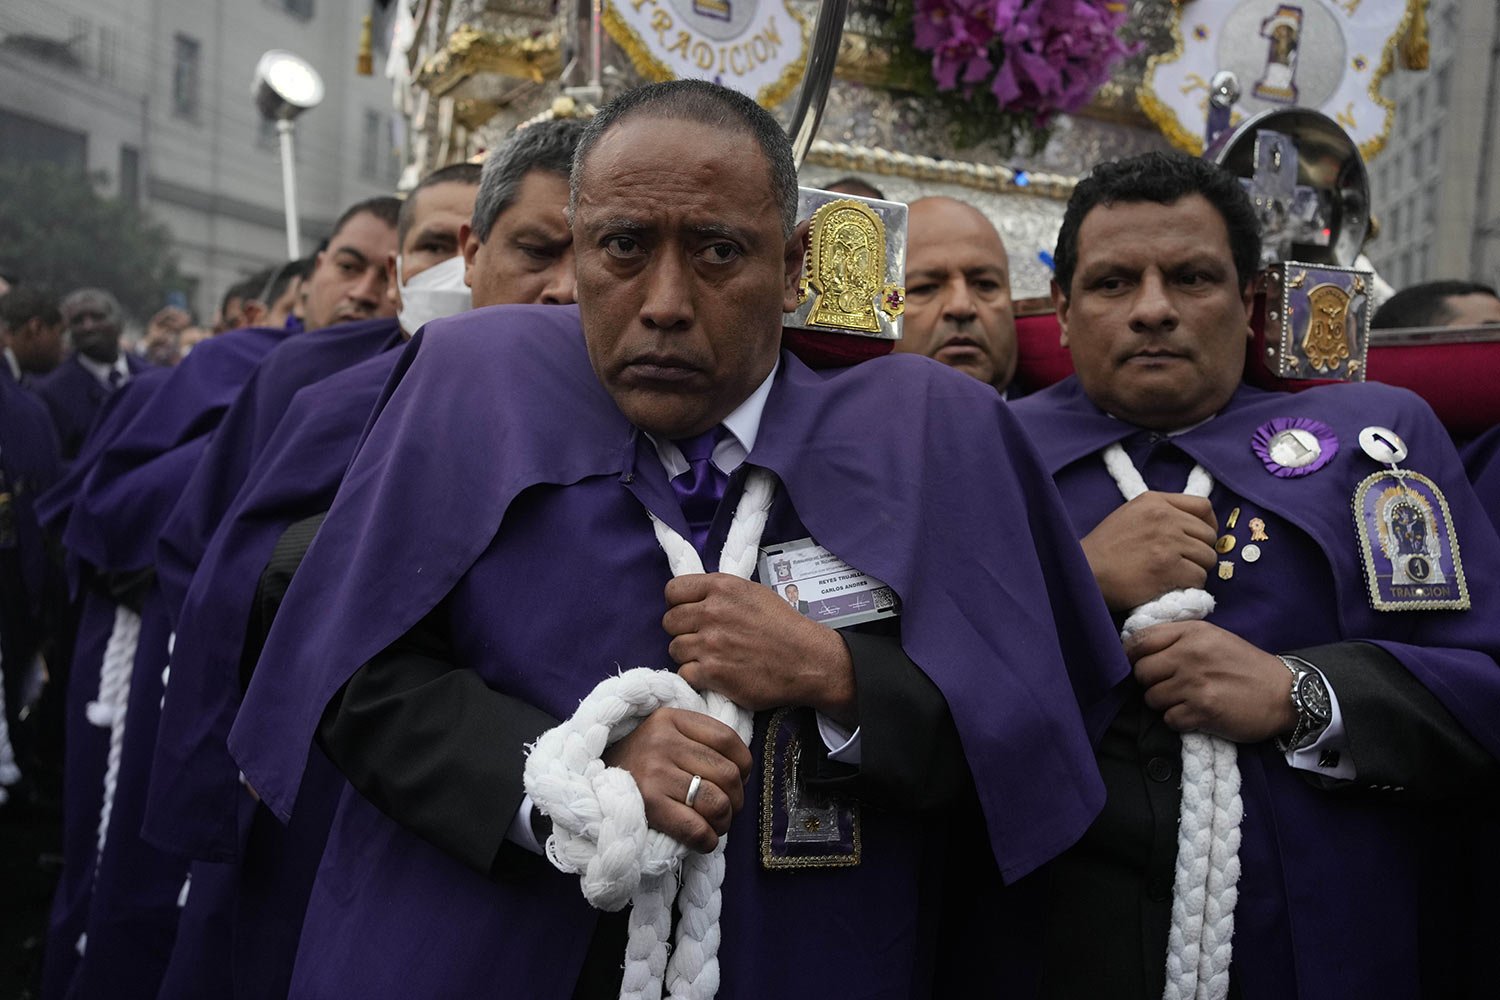  "Cargadores" or carriers, shoulder a religious float supporting The Lord of Miracles religious icon during a procession marking the the nation's patron saint feast day in Lima, Peru, Tuesday, Oct. 18, 2022. (AP Photo/Martin Mejia) 